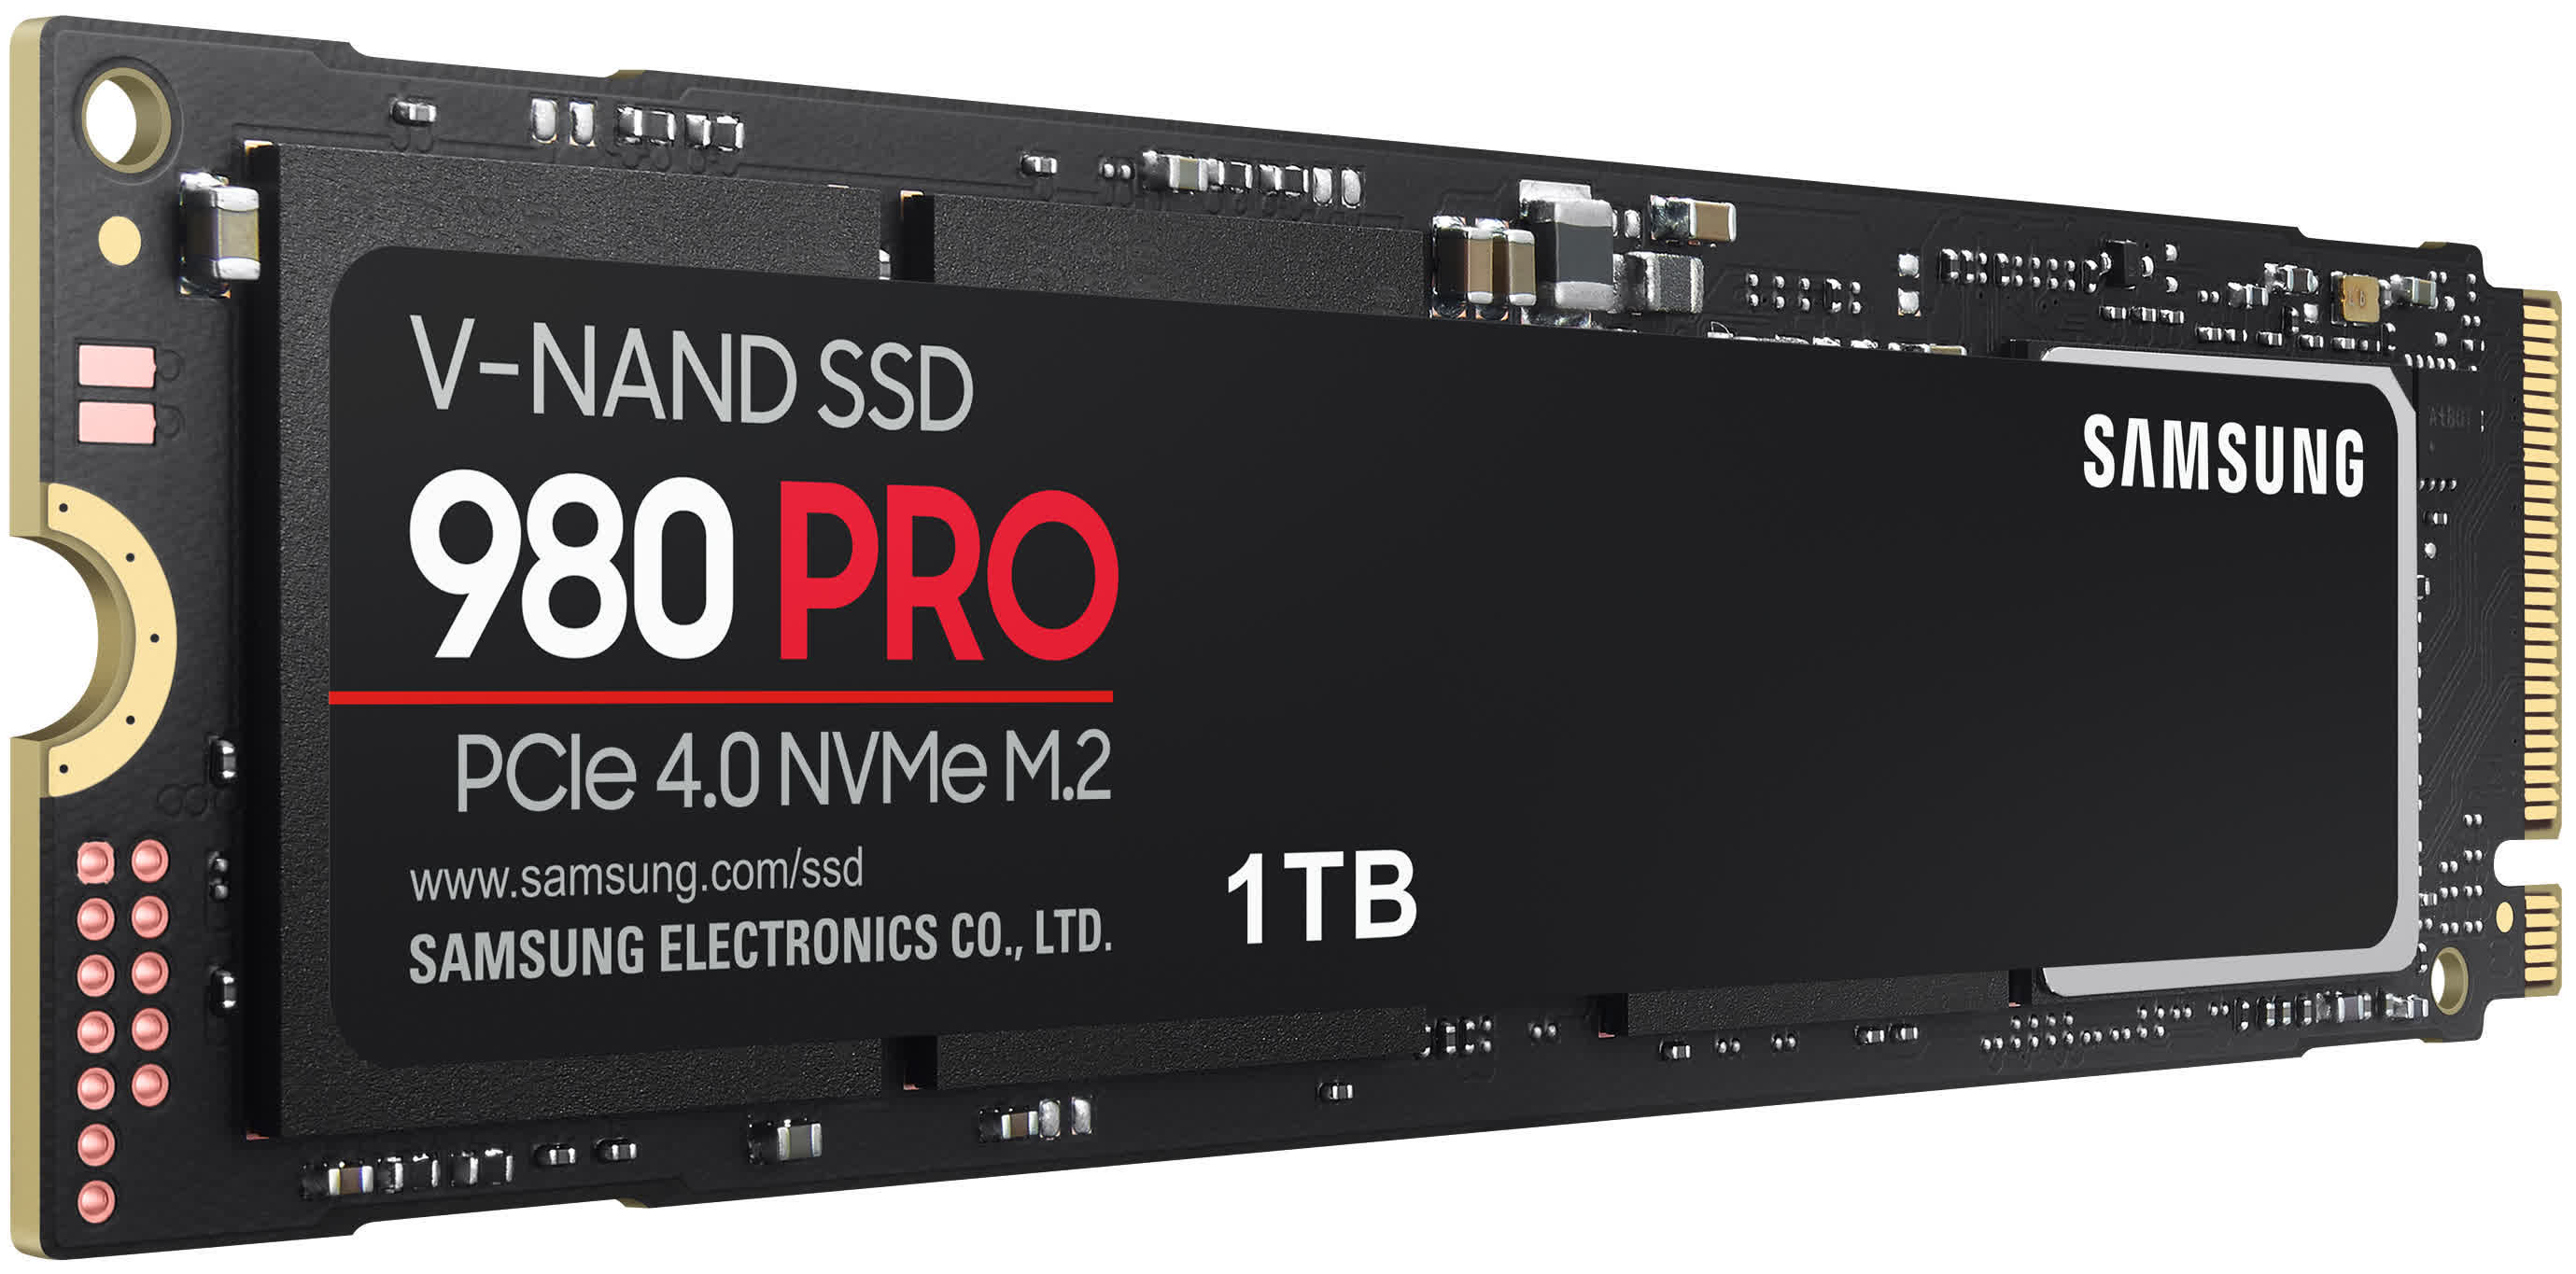 Samsung's 980 Pro 2TB SSD dips to $249, its lowest price ever